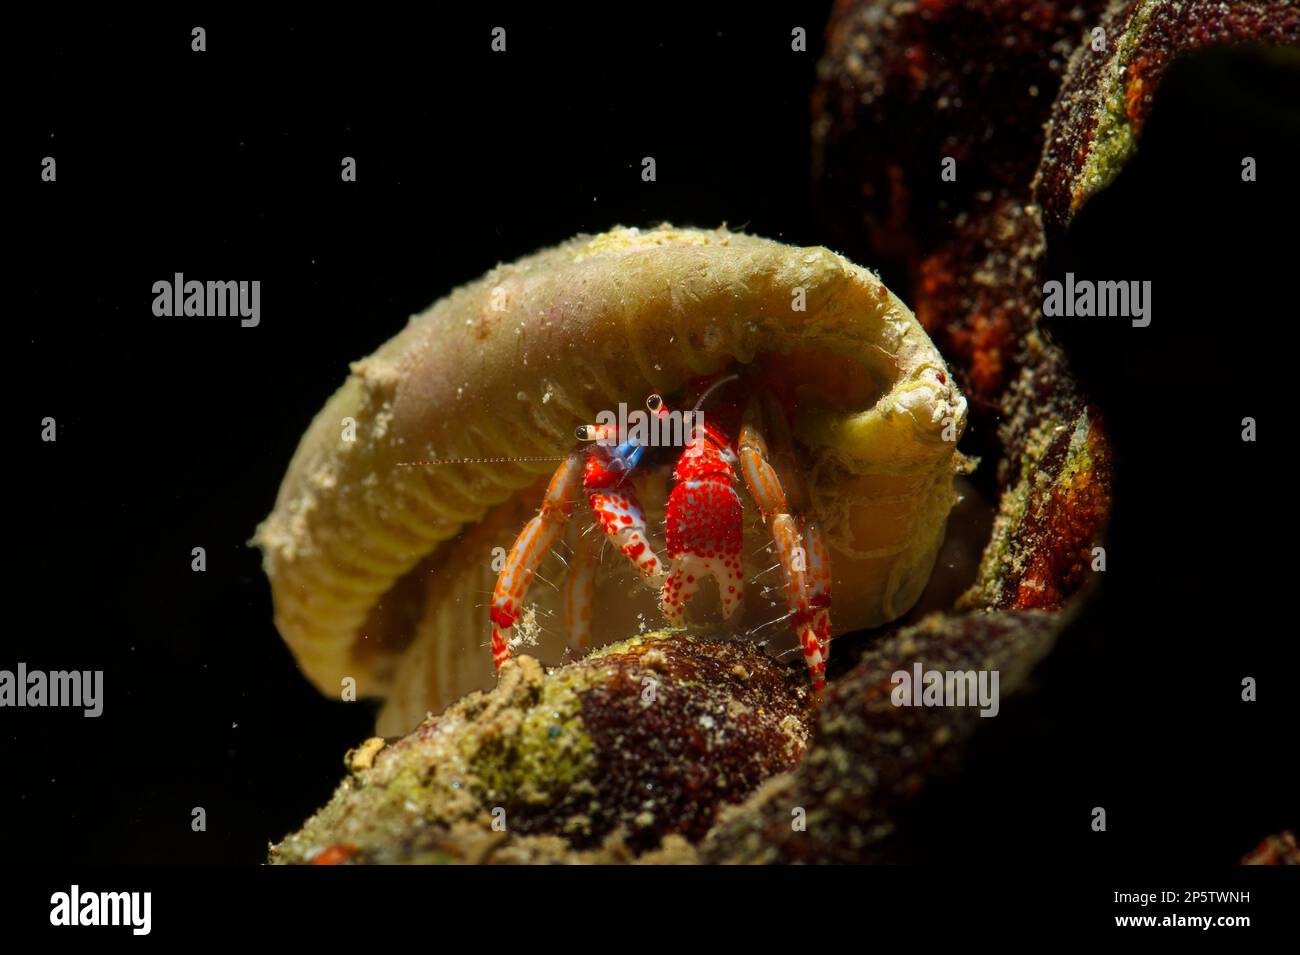 Mediterranean Hermit Crab (Calcinus tubularis) - An interesting hermit crab that inhabits both mobile gastropod shells and fixed gastropod tubes. The Stock Photo